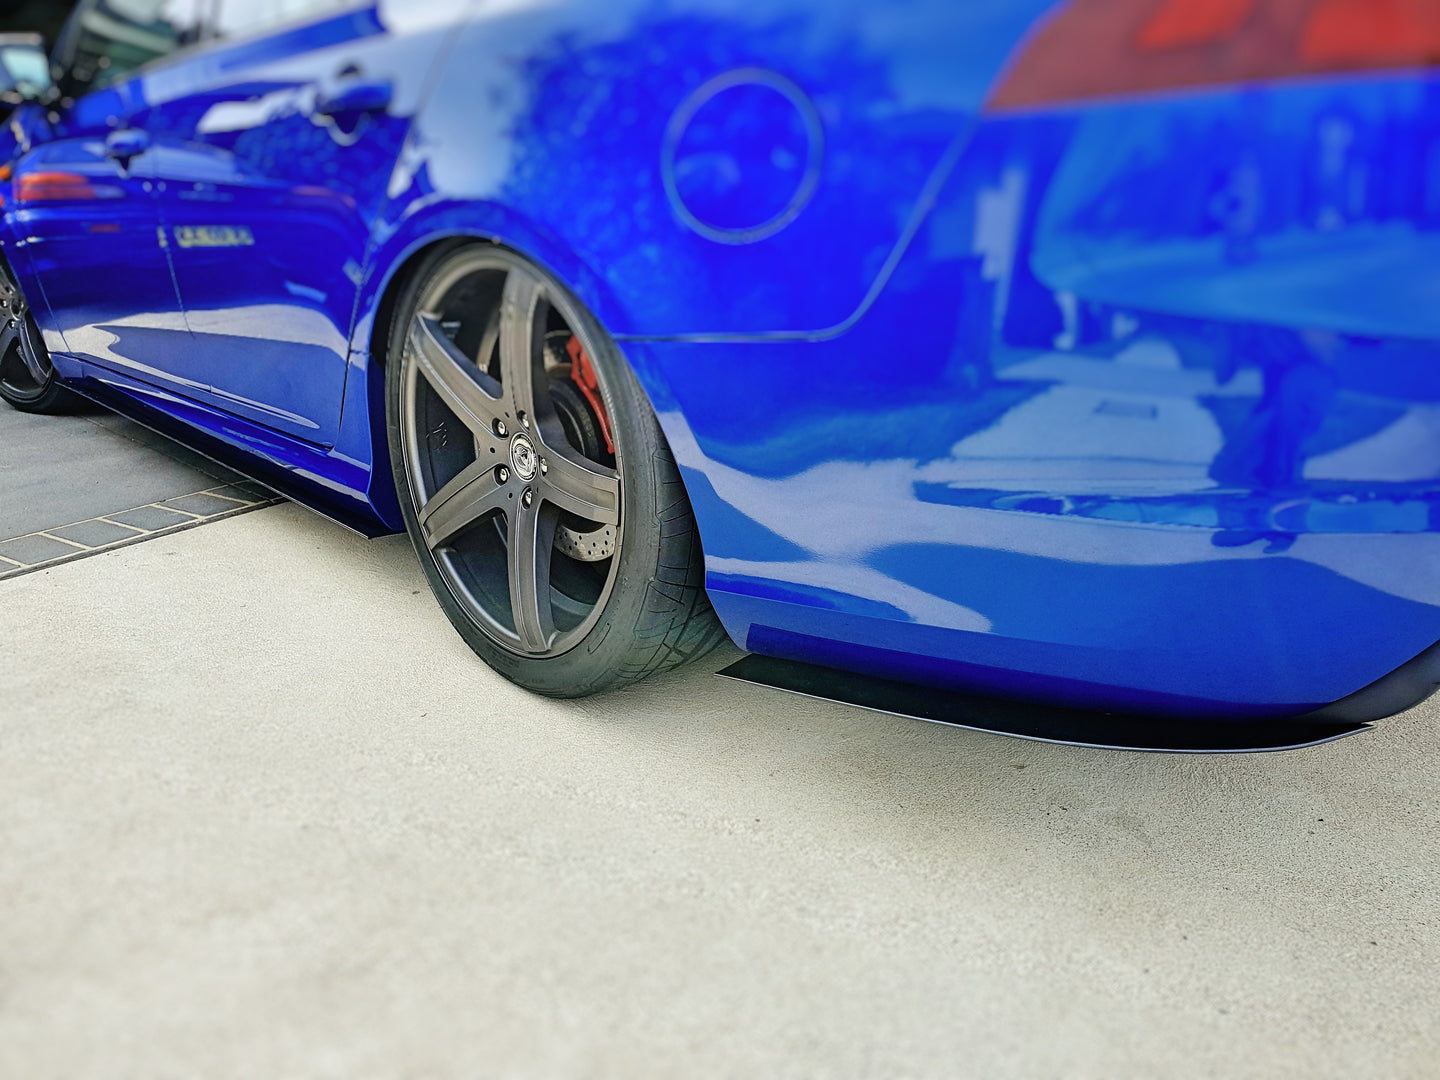 Ford Falcon FGX Side Skirt Extensions